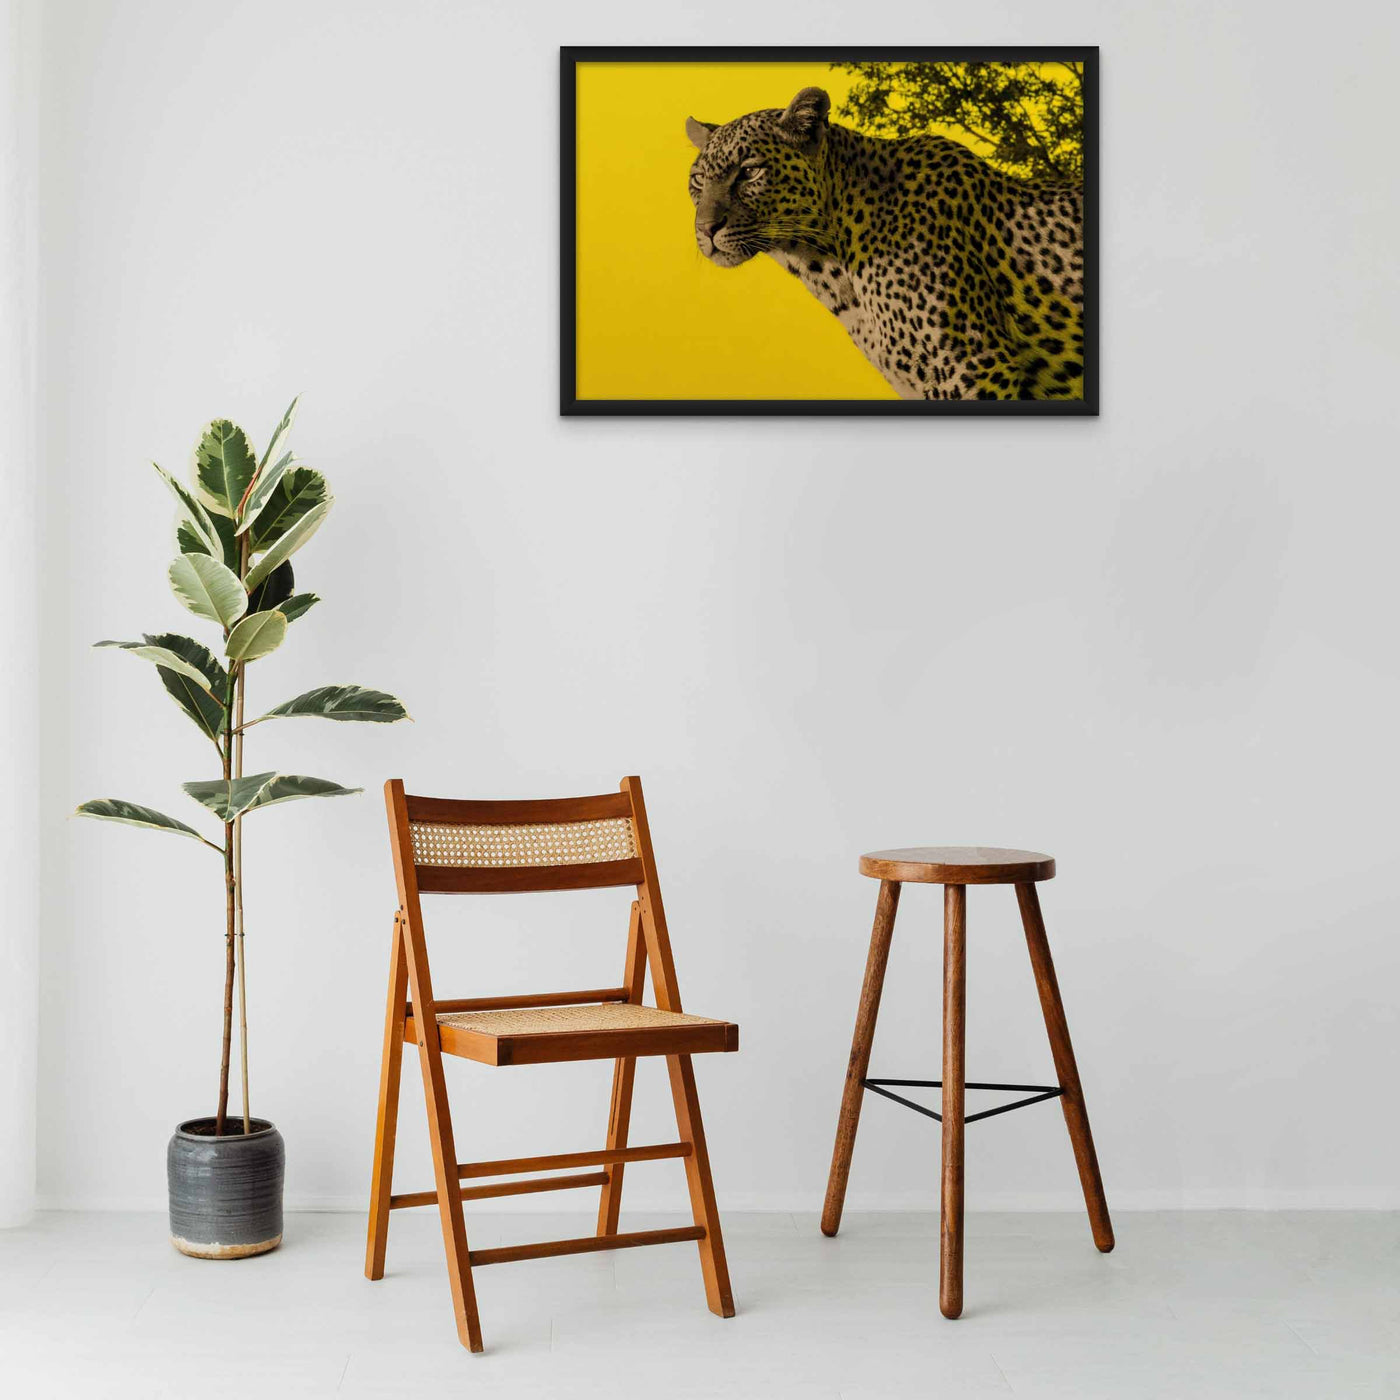 JUST ANOTHER YELLOW LEOPARD - Matteo Occhipinti - 2019 - 60 x 90 - Limited Edition 02